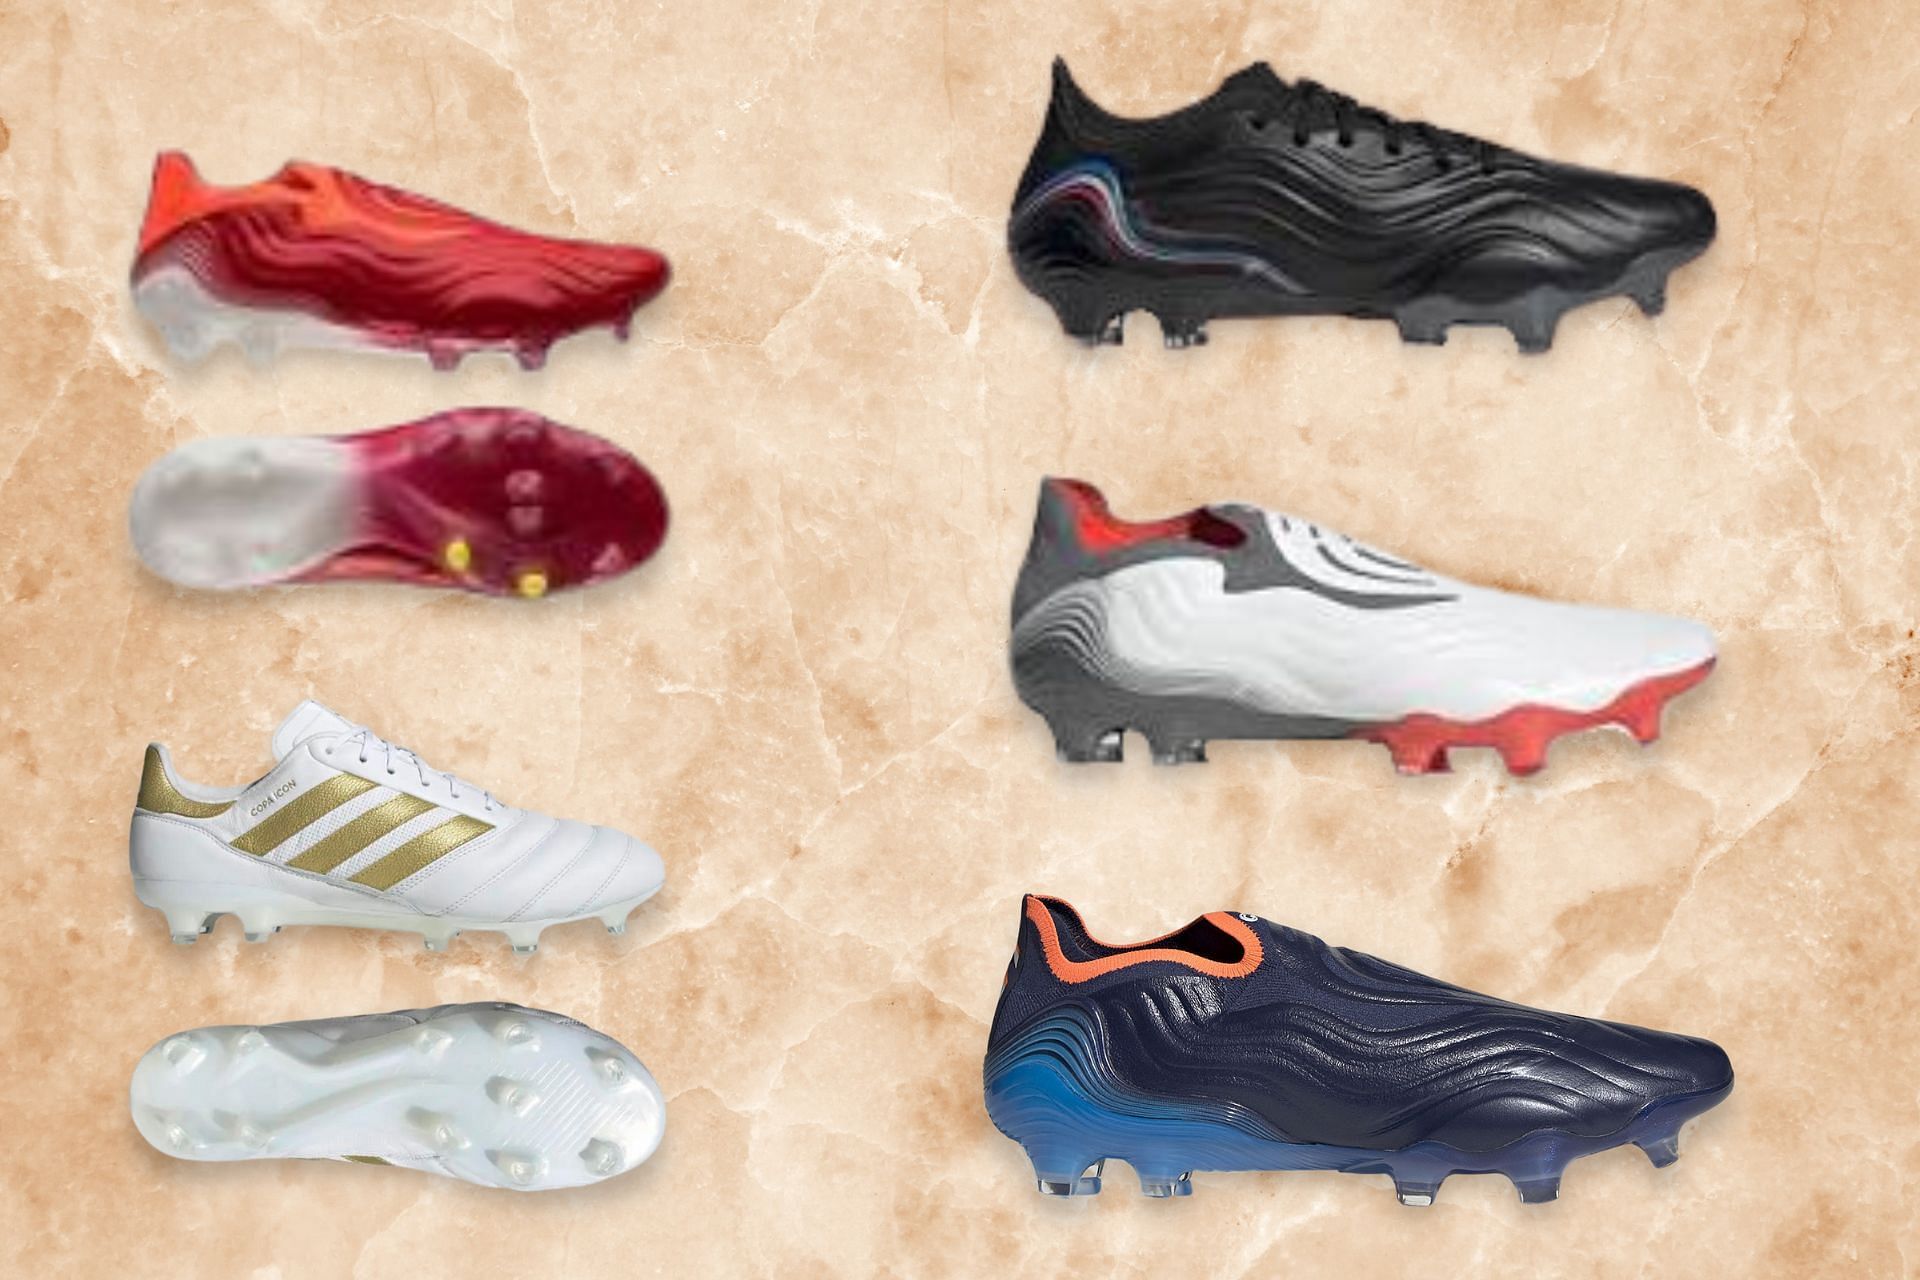 Top five Adidas Copa Sense football boots in different colourways that were launched this year 2022 (Image via Sportskeeda) 